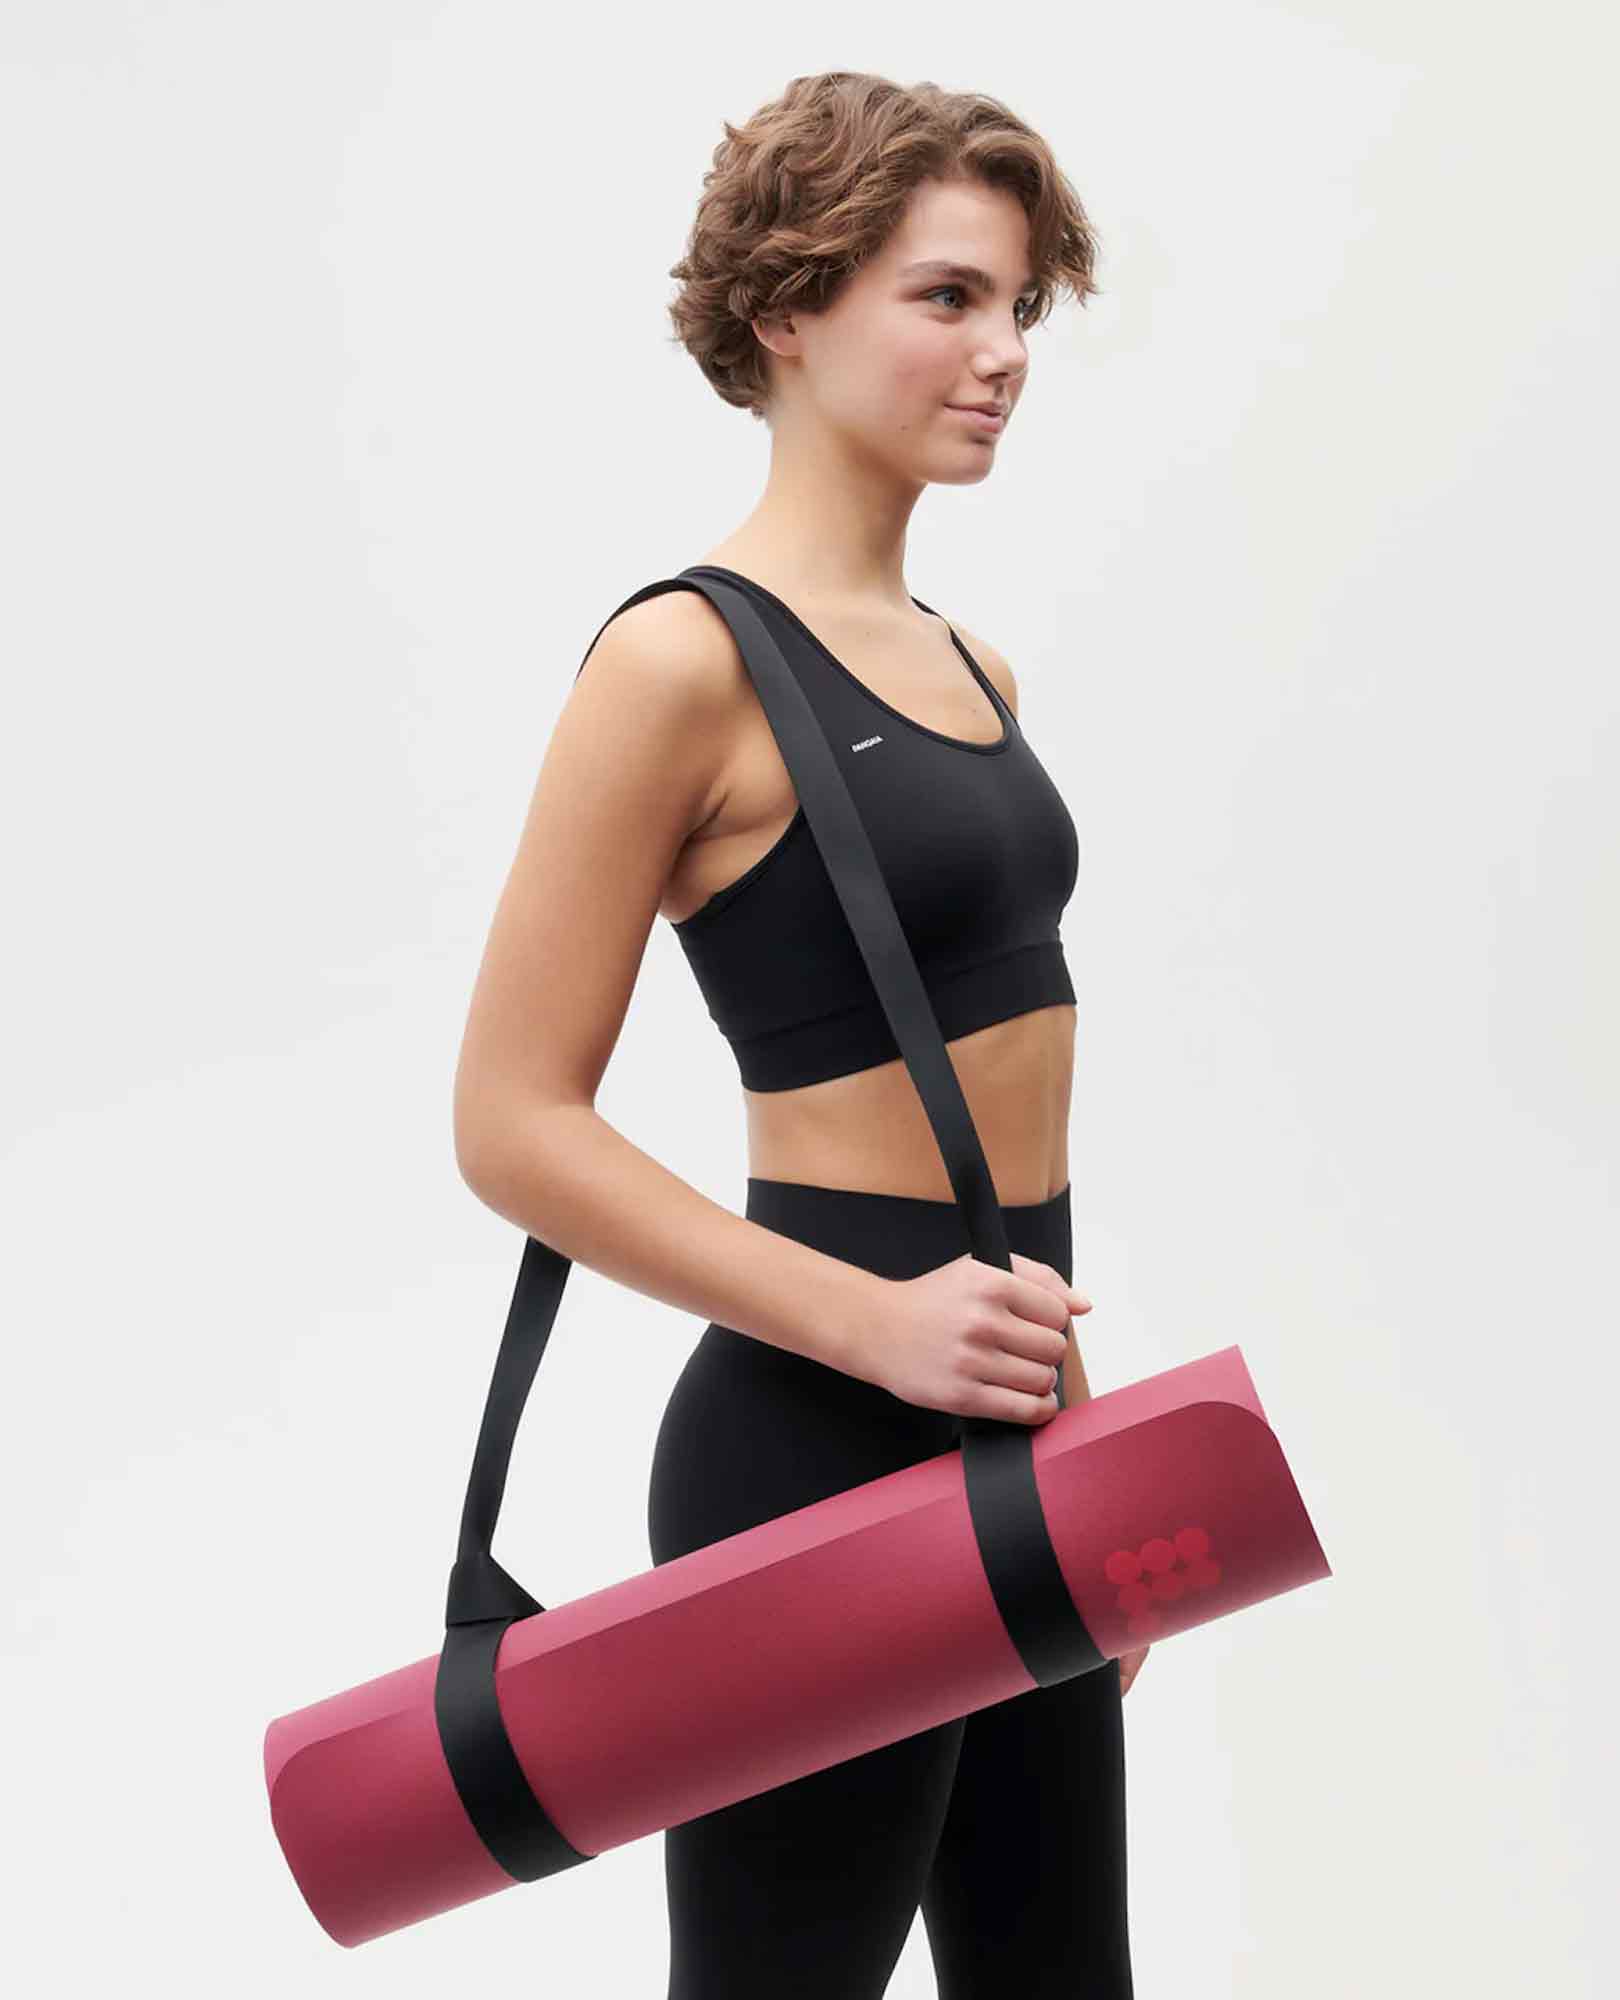 Sparkpick features PANGAIA natural rubber and recycled yoga mat in sustainable fashion